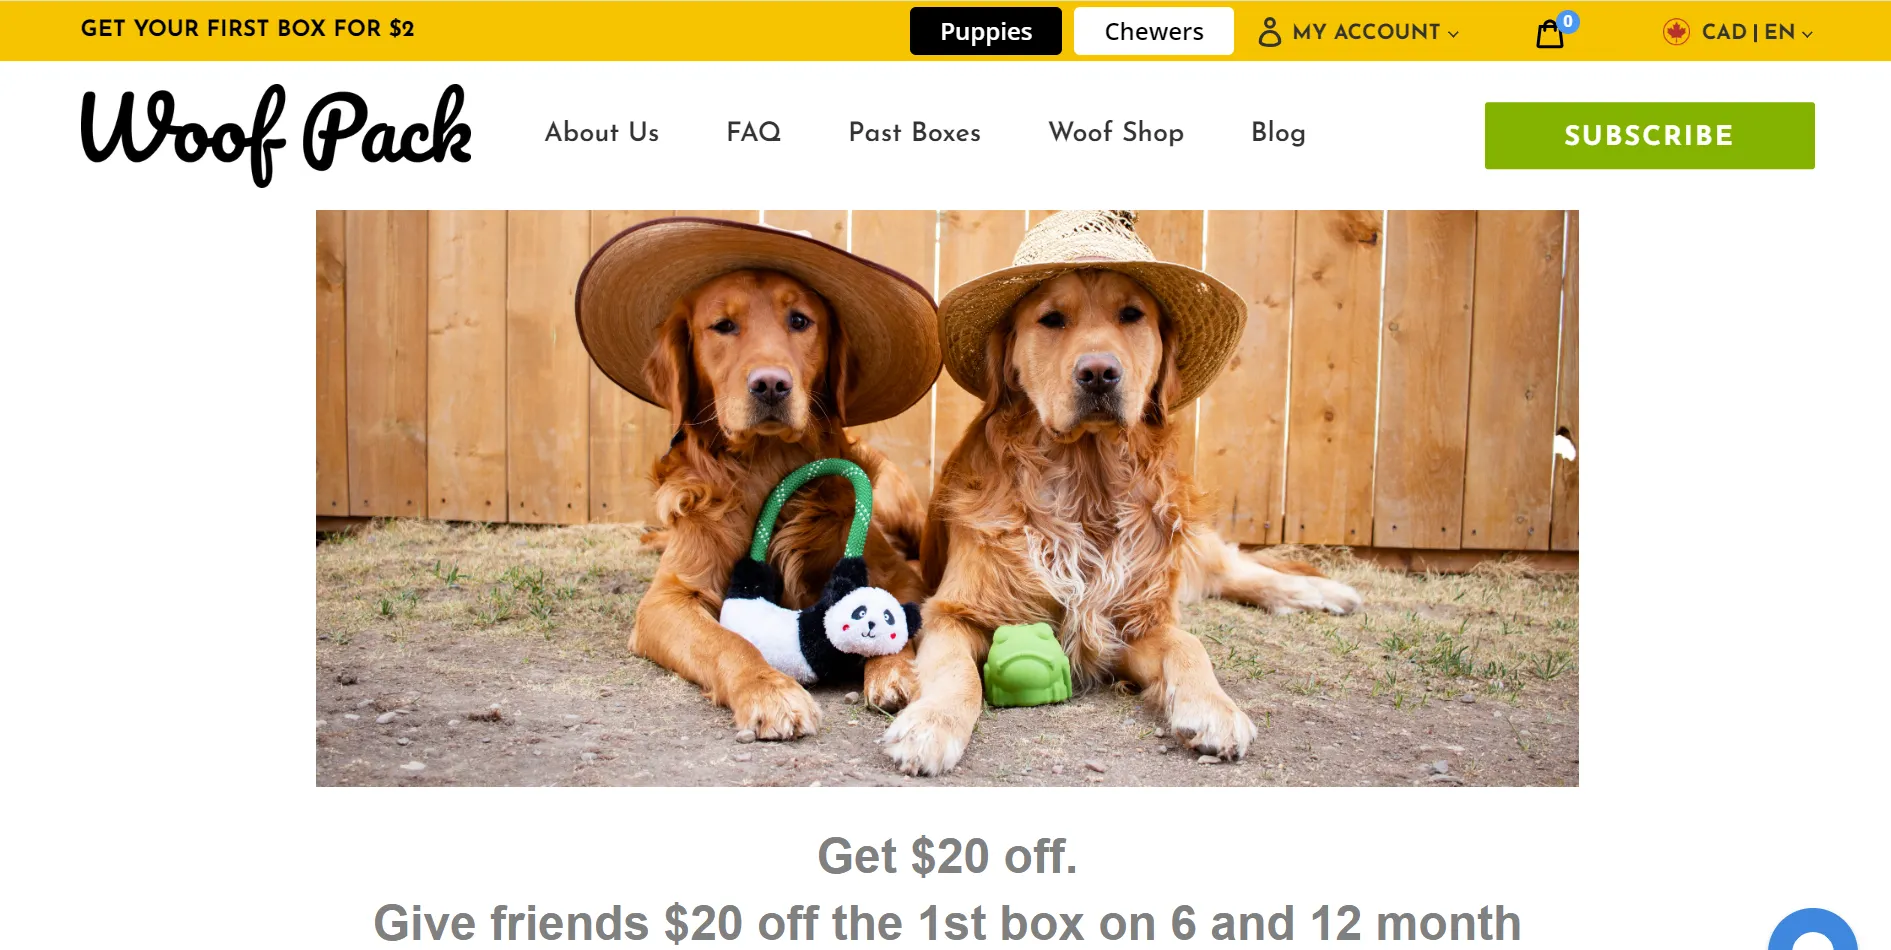 two golden retrievers wearing hats and sitting next to each other with their toys